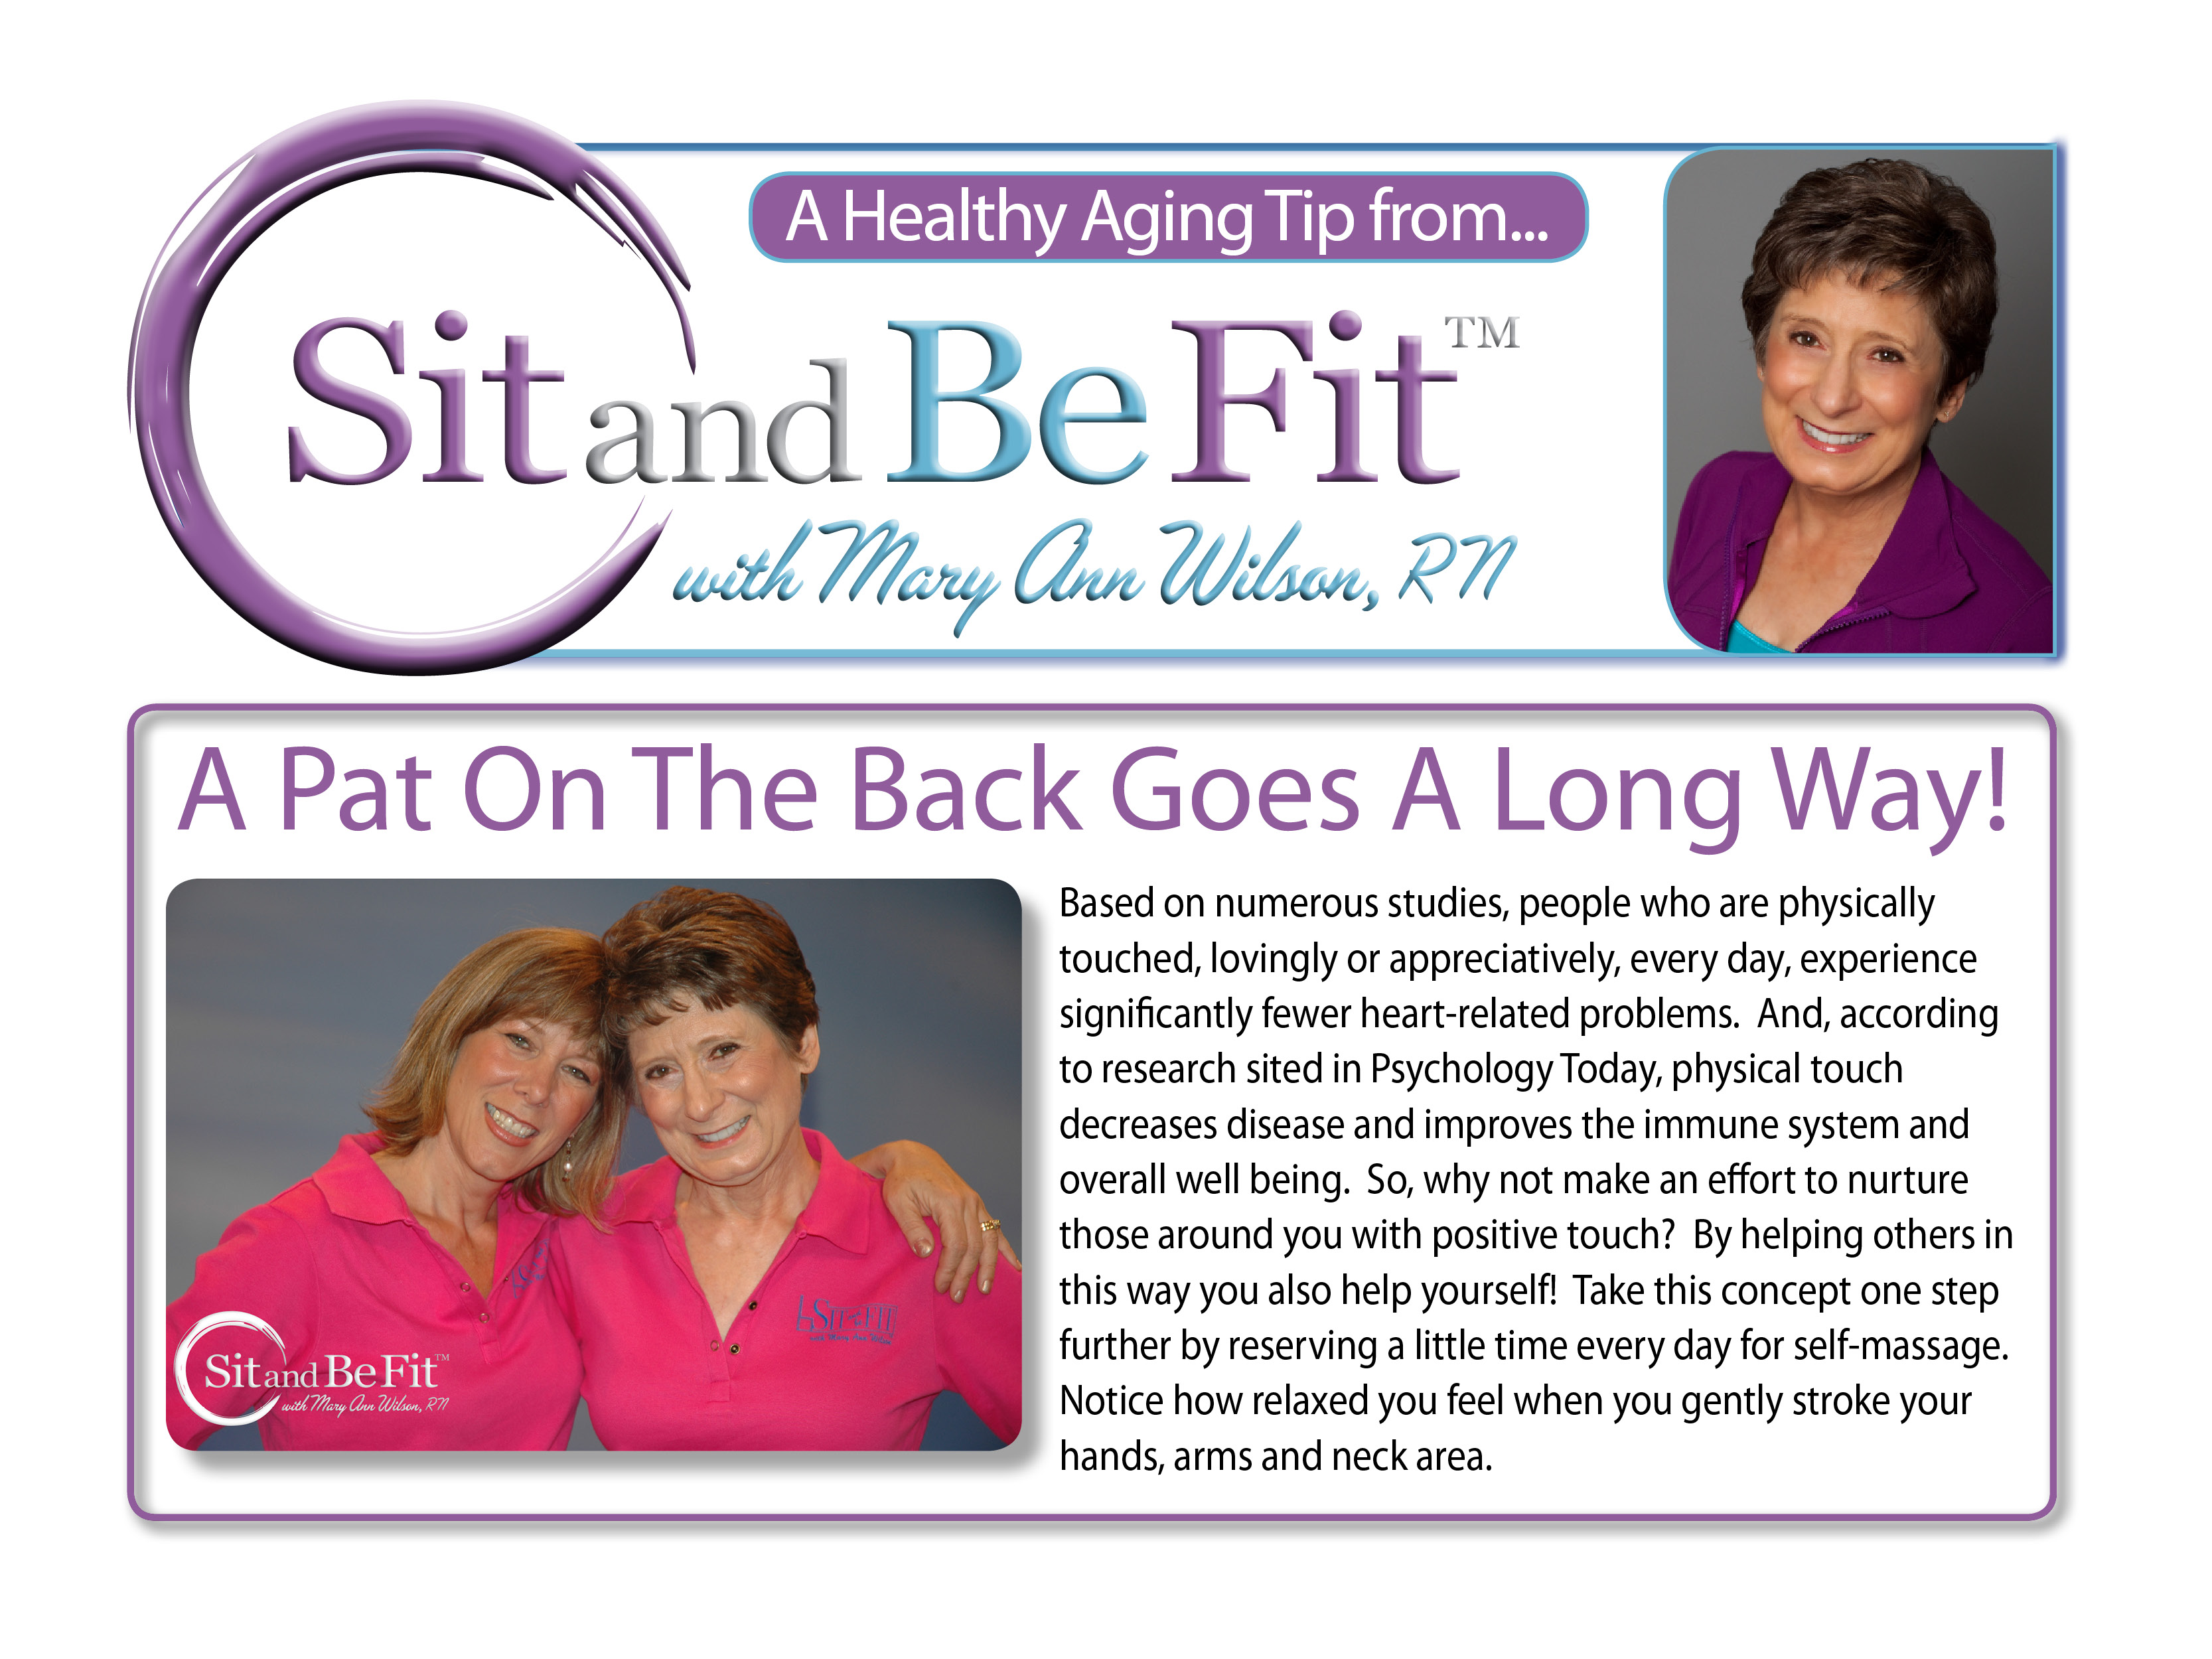 Sit and Be Fit host, Mary Ann Wilson RN, shares tips about healthy aging.